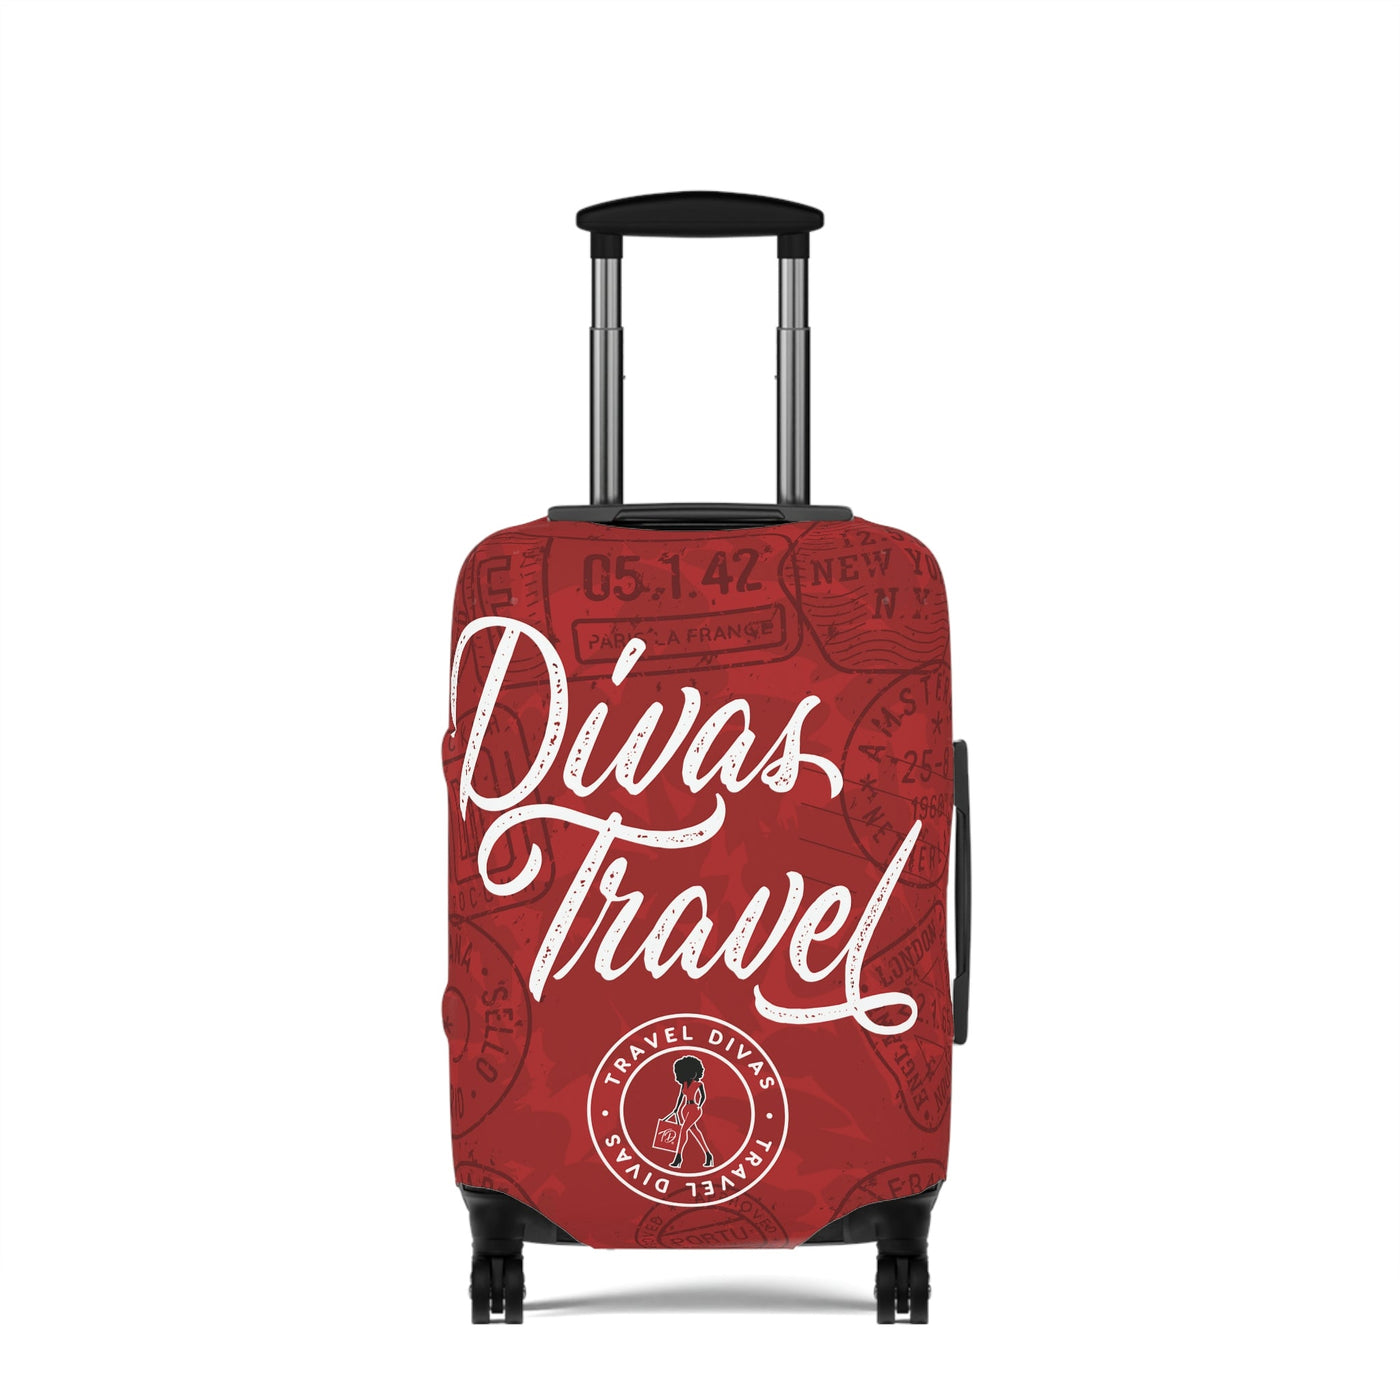 Divas Travel Luggage Cover - RED